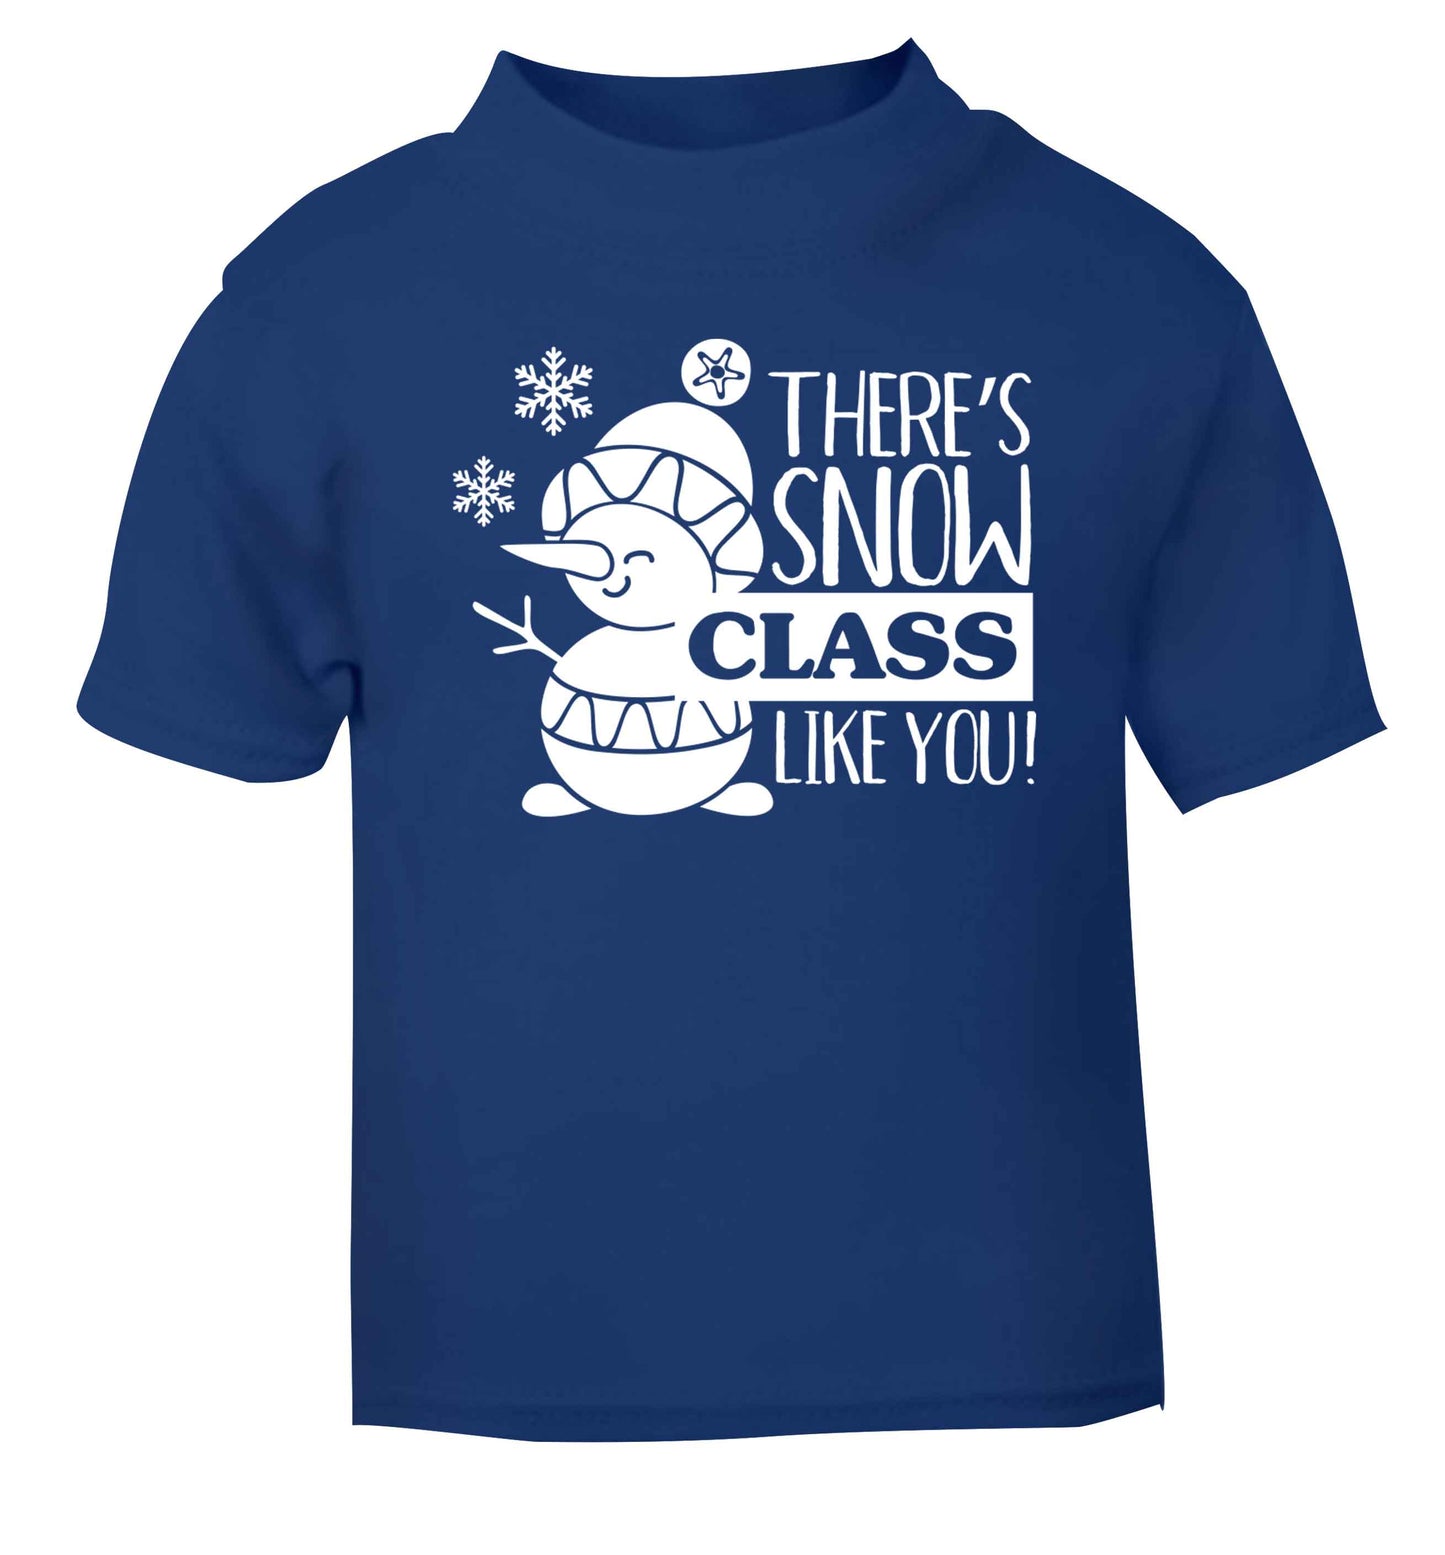 There's snow class like you blue baby toddler Tshirt 2 Years